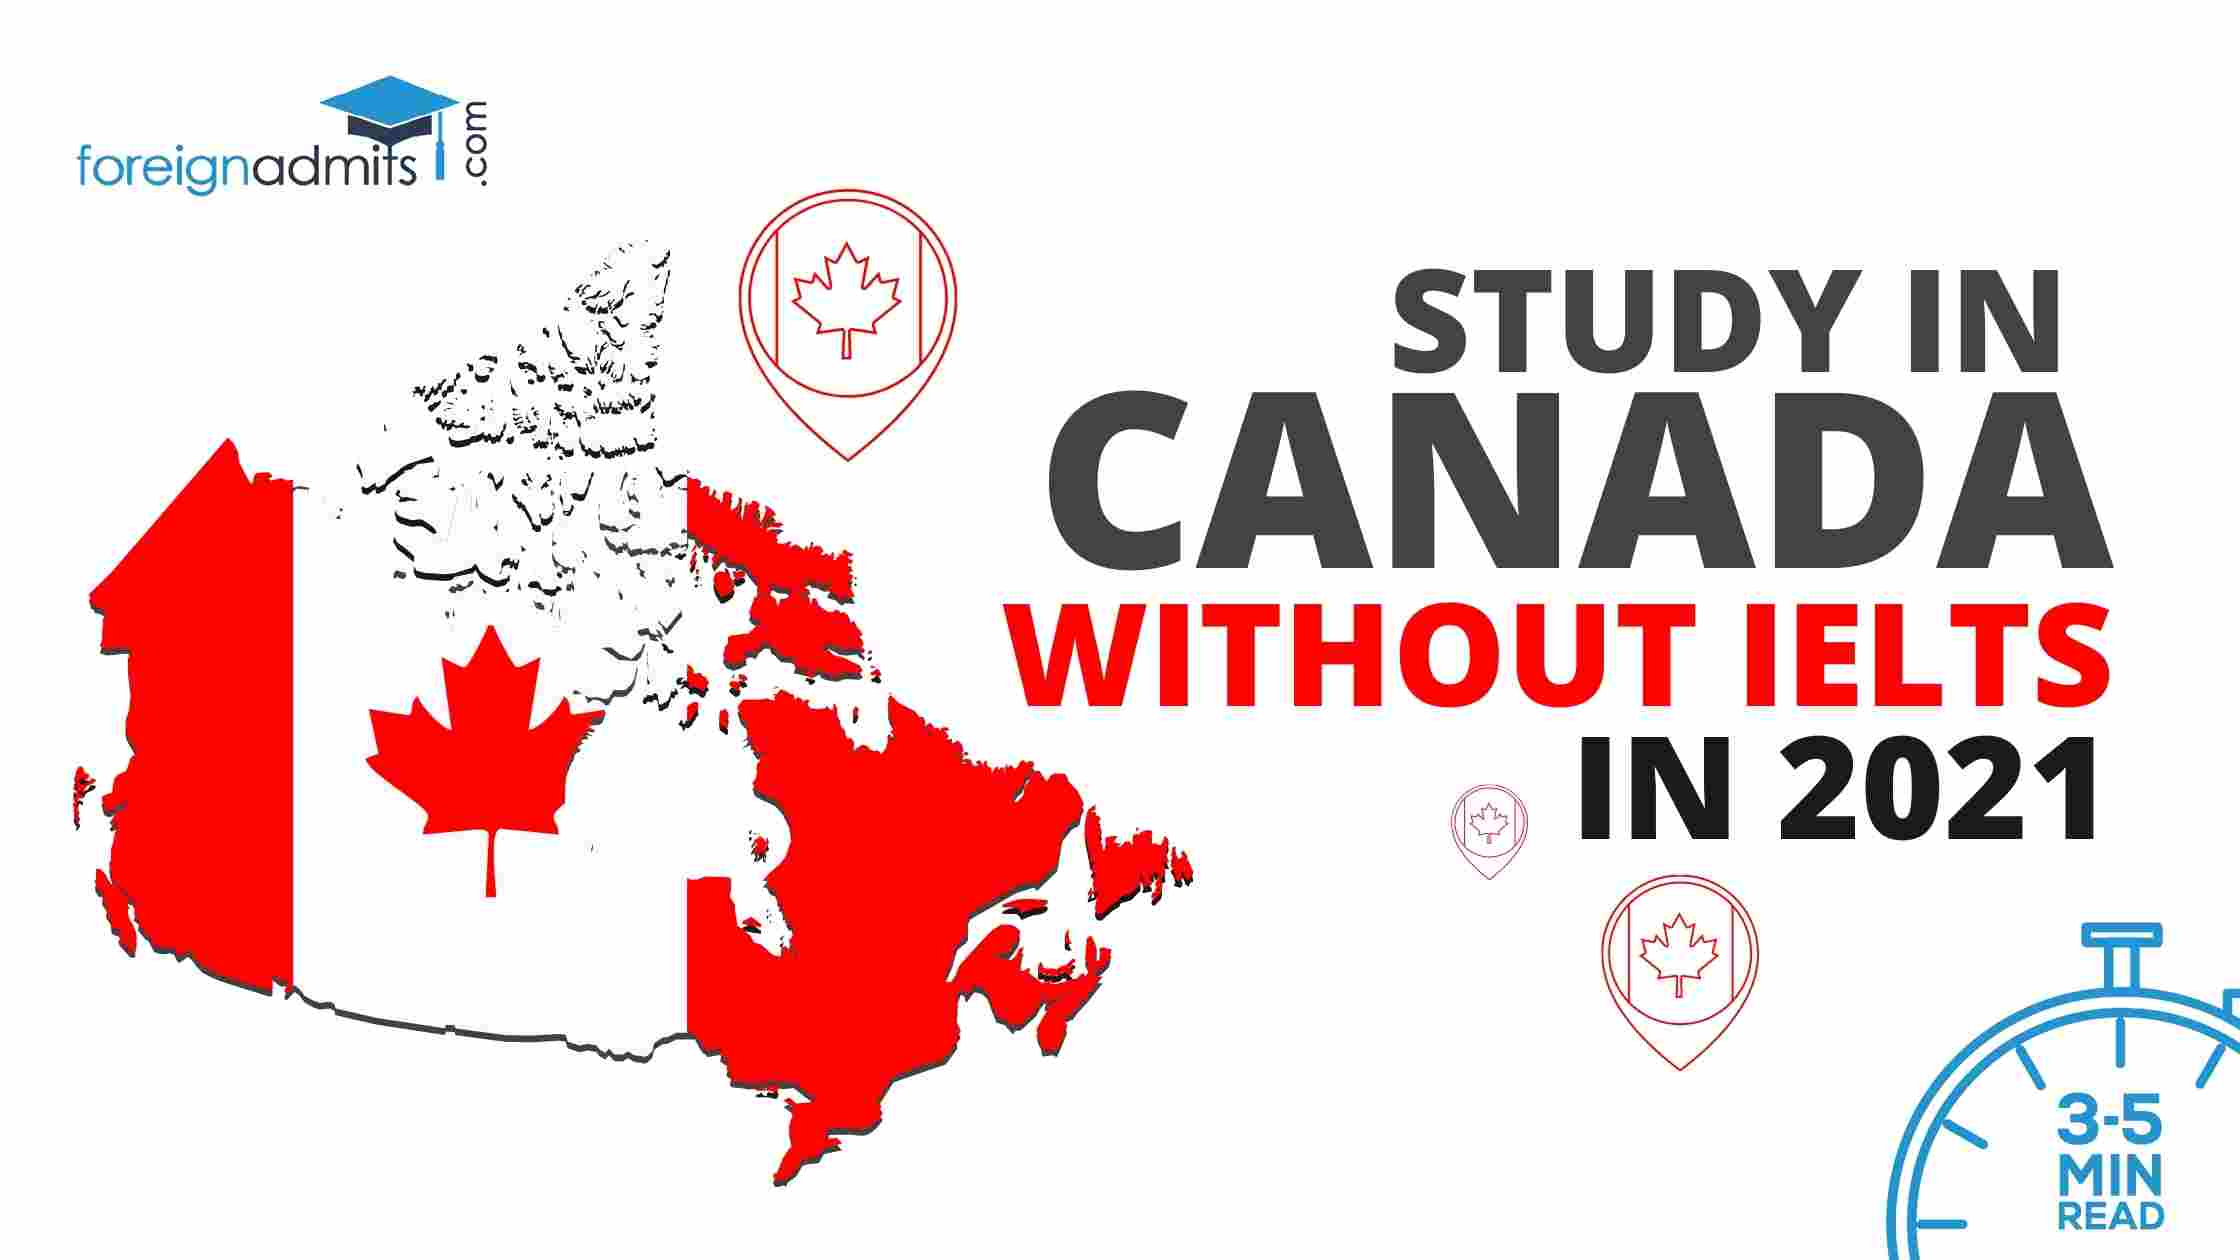 Study in Canada without IELTS in 2021